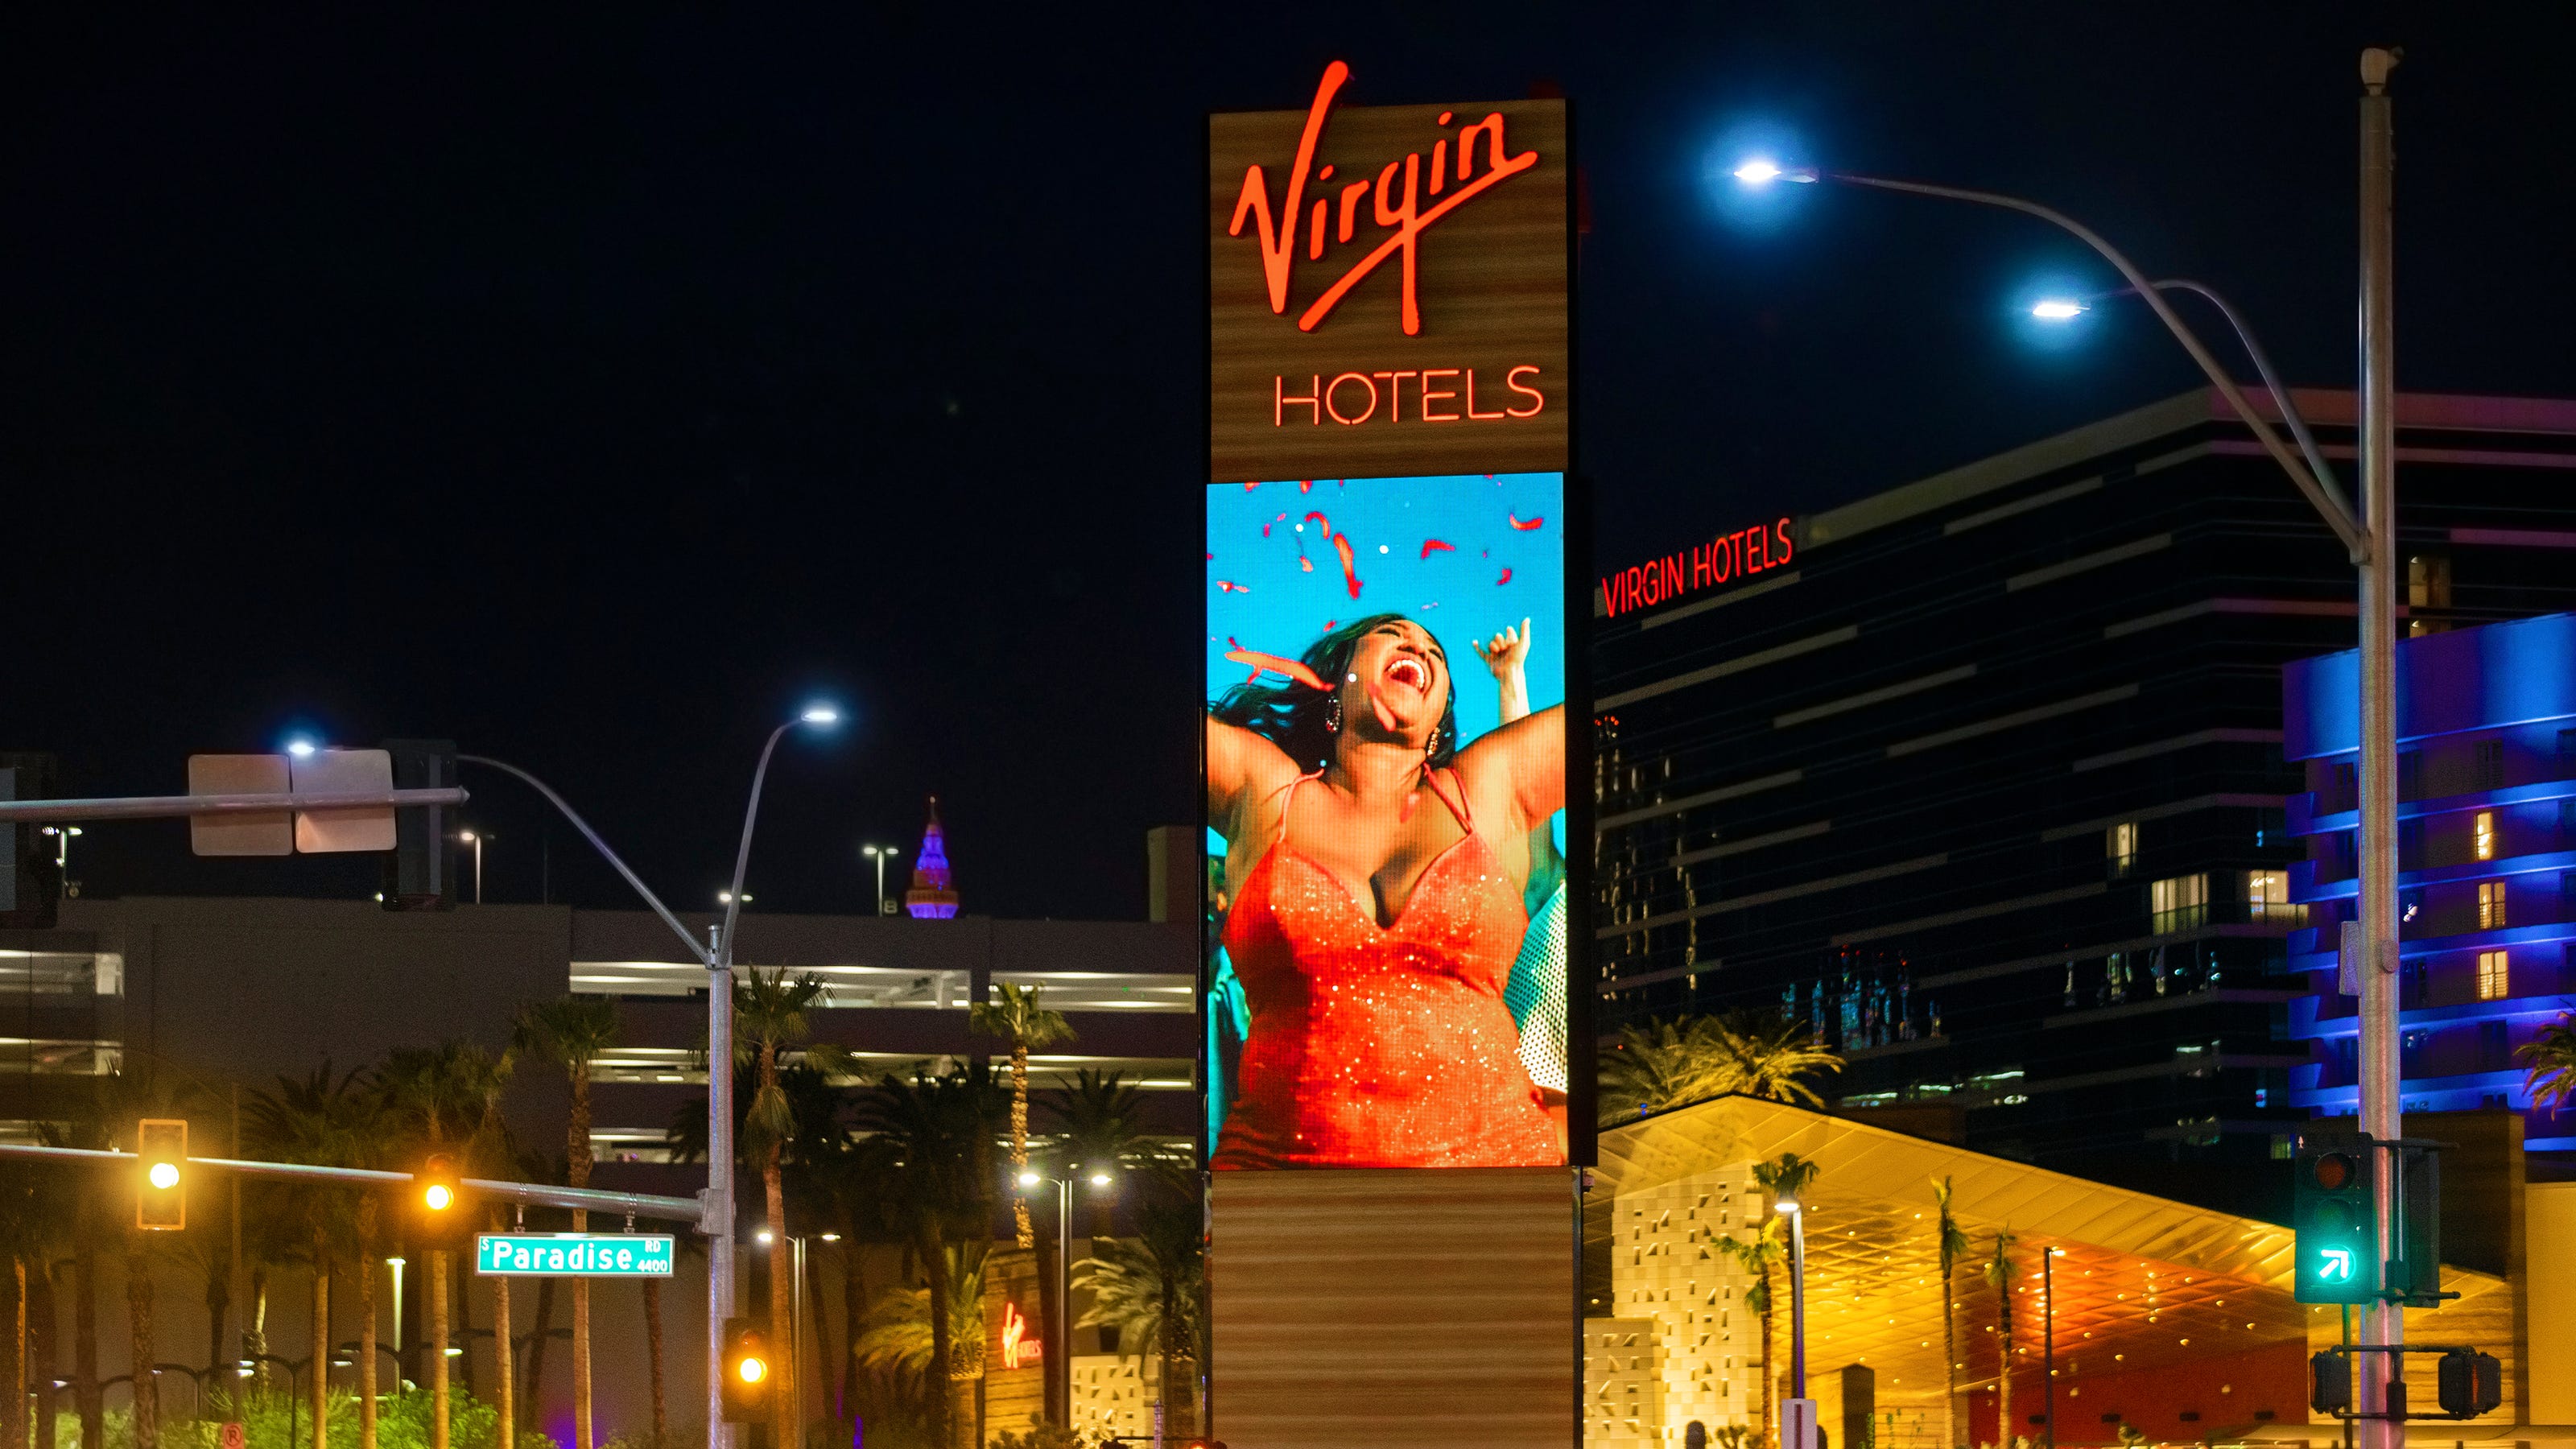 Las Vegas Virgin Hotels resort opening signals optimism for recovery